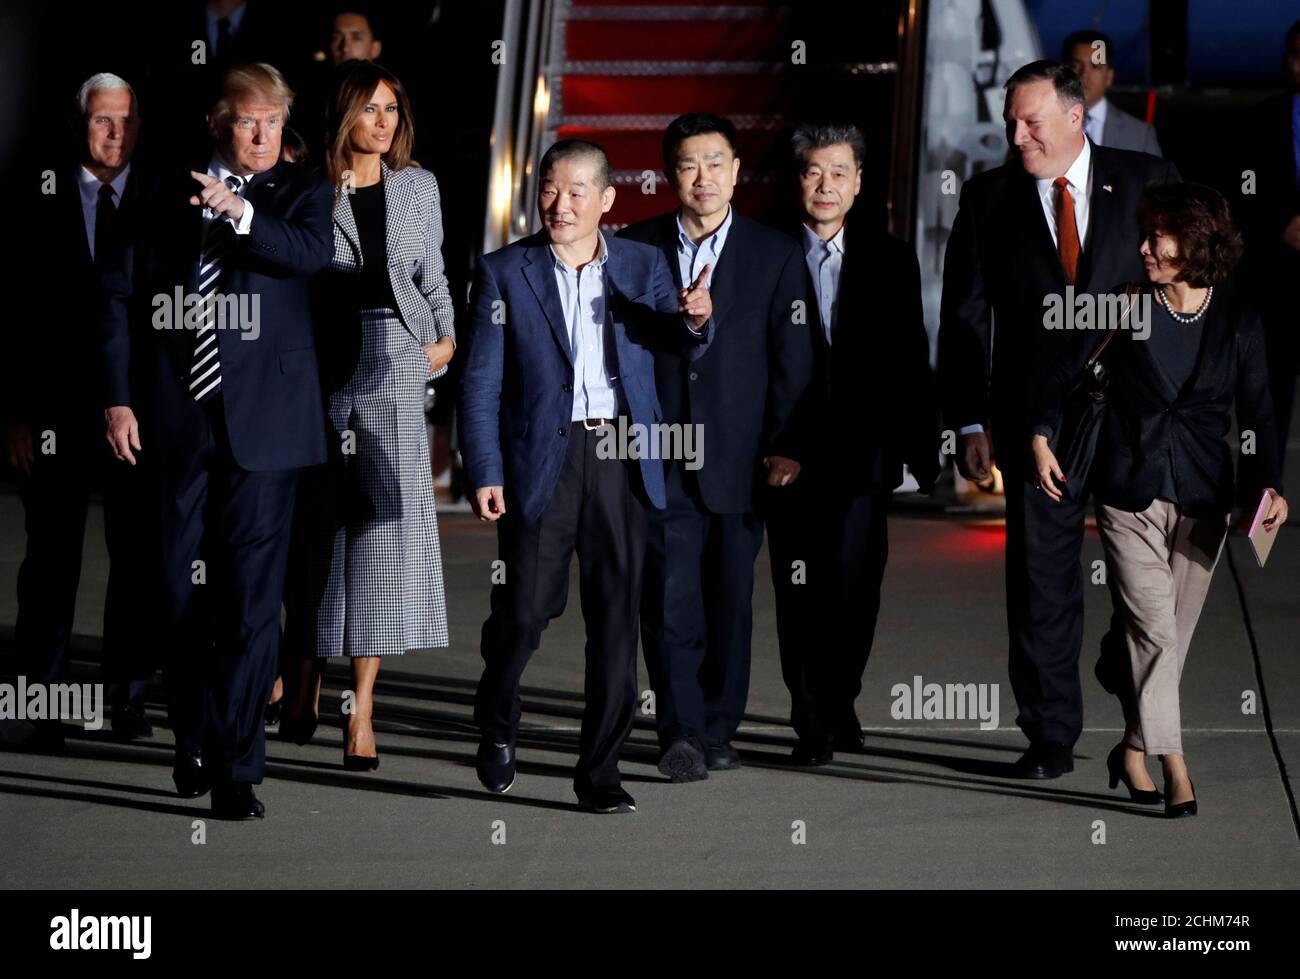 The three Americans formerly held hostage in North Korea, Tony Kim, Kim Hak-song and Kim Dong-chul, walk next to U.S.President Donald Trump, first lady Melania Trump, U.S. Vice President Mike Pence and U.S. Secretary of State Mike Pompeo at Joint Base Andrews, Maryland, U.S., May 10, 2018. REUTERS/Jim Bourg Stock Photo